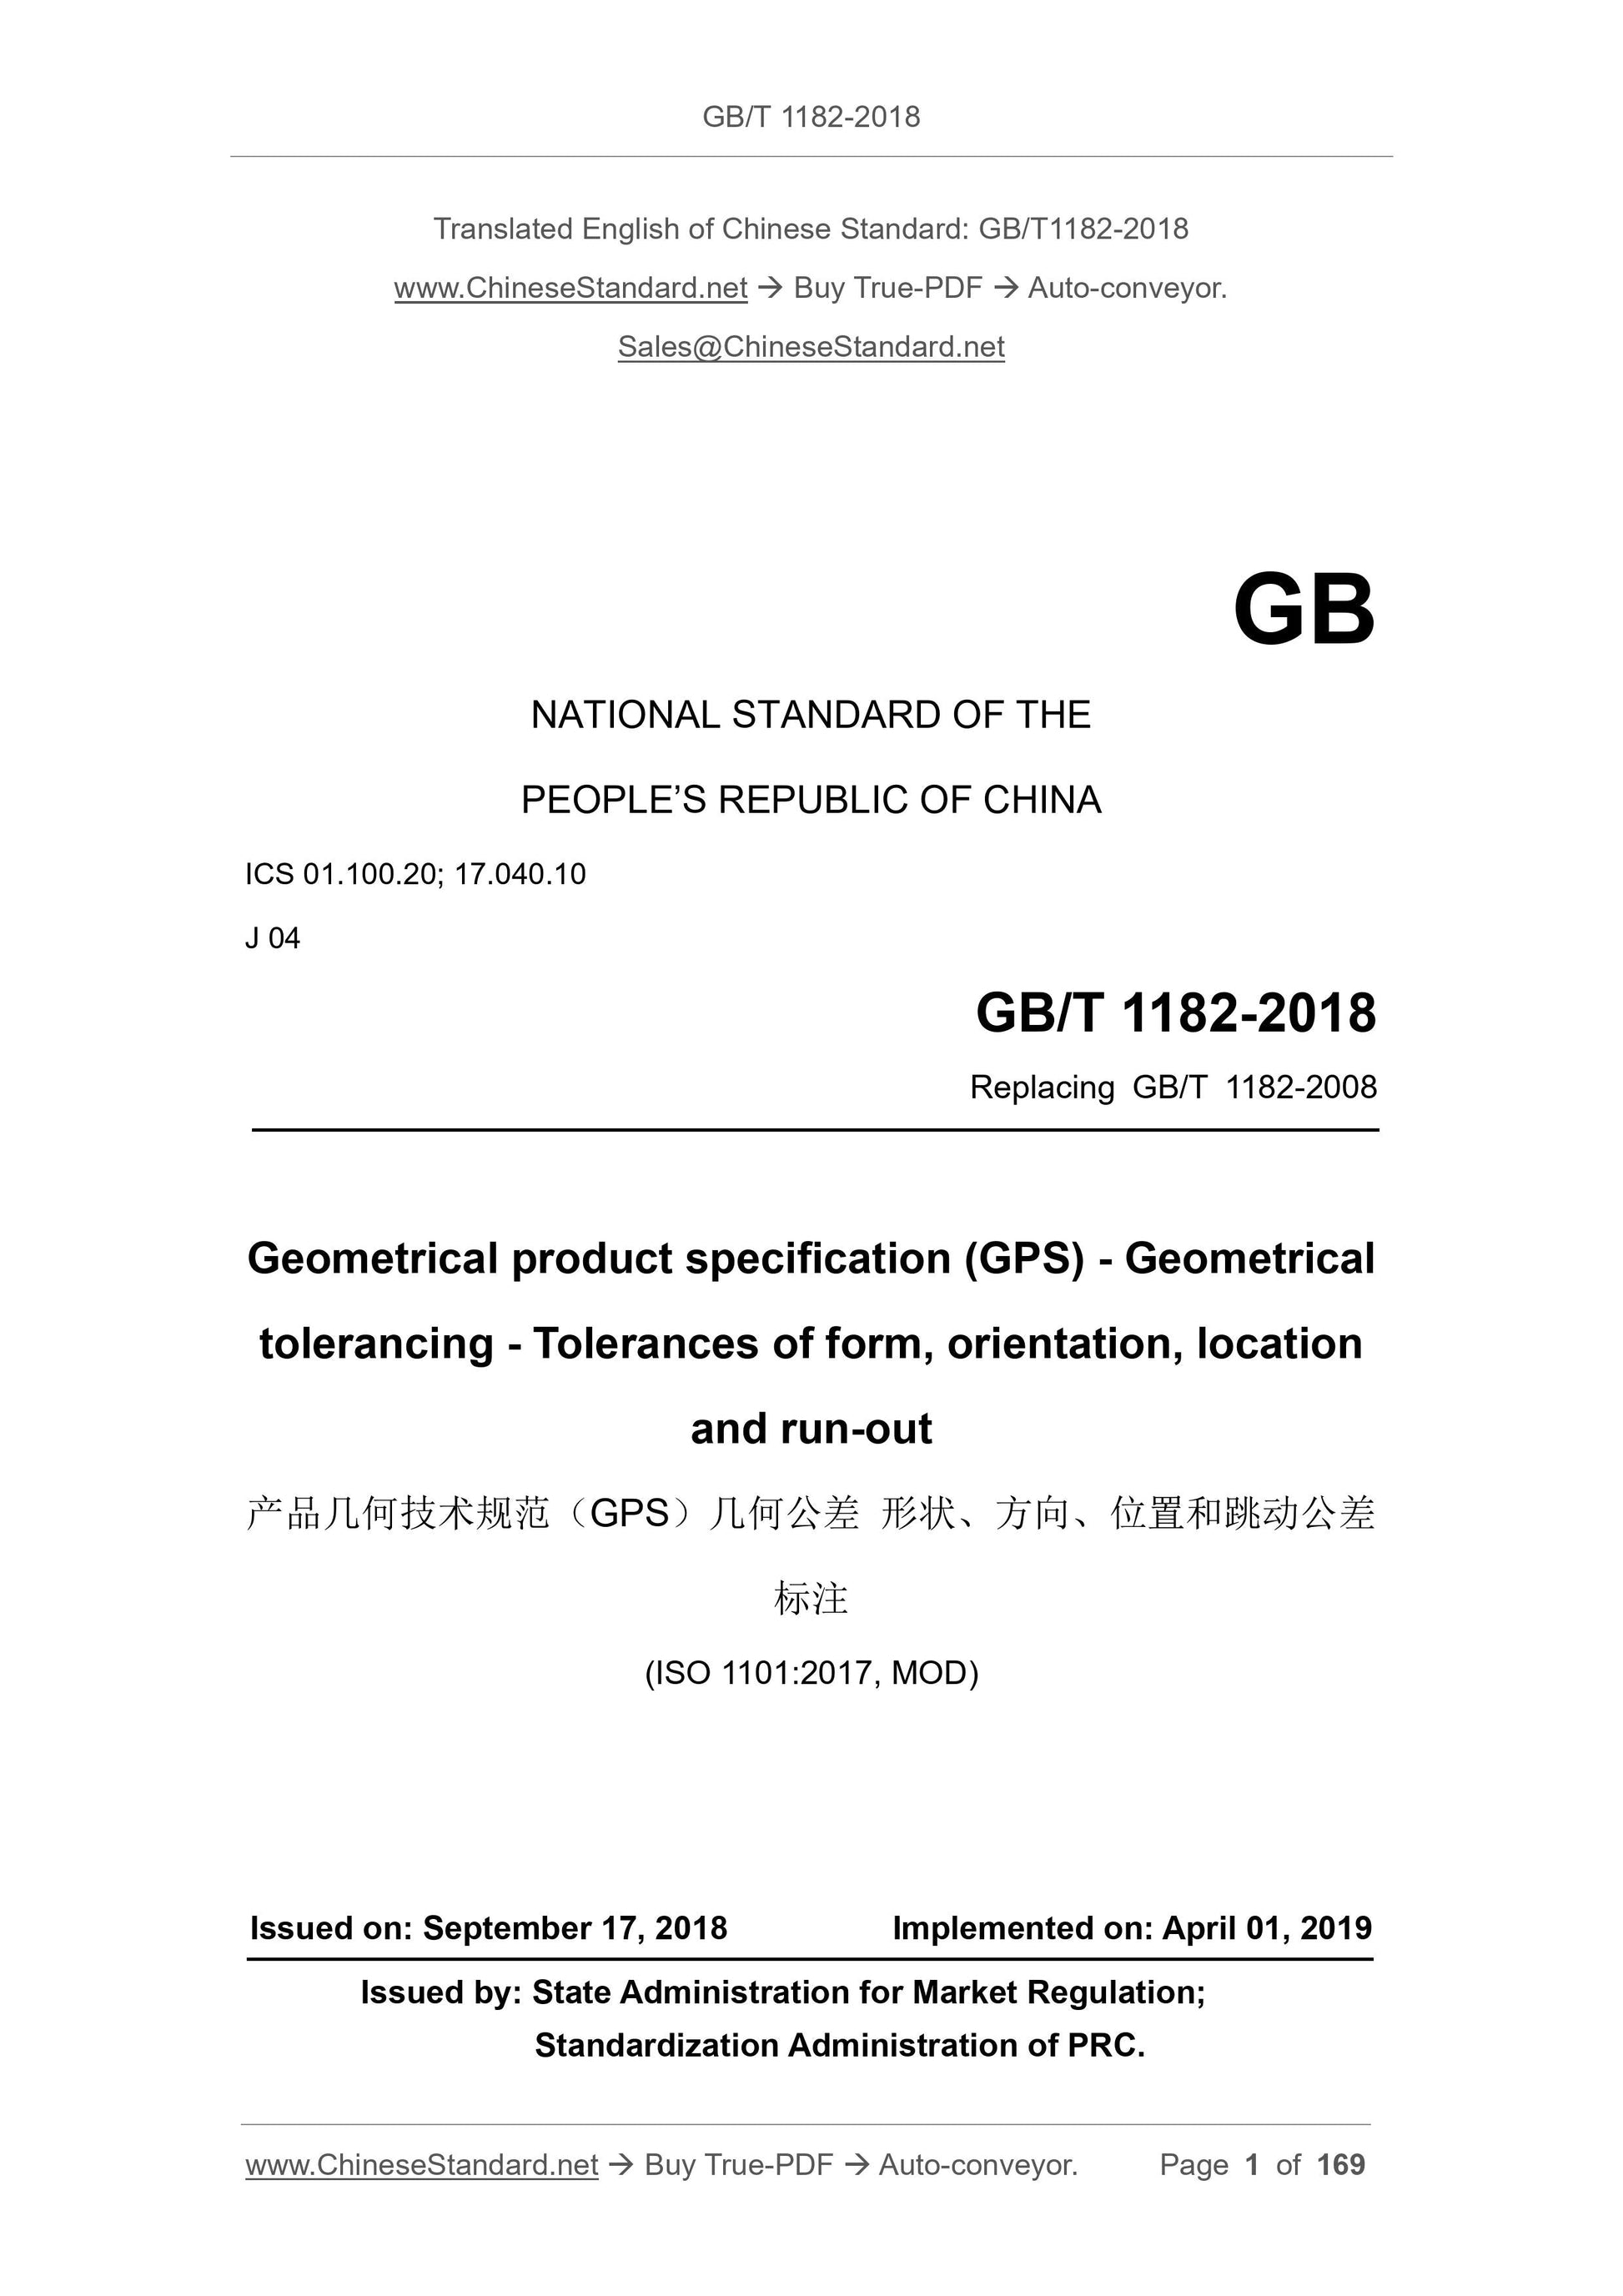 GB/T 1182-2018 Page 1